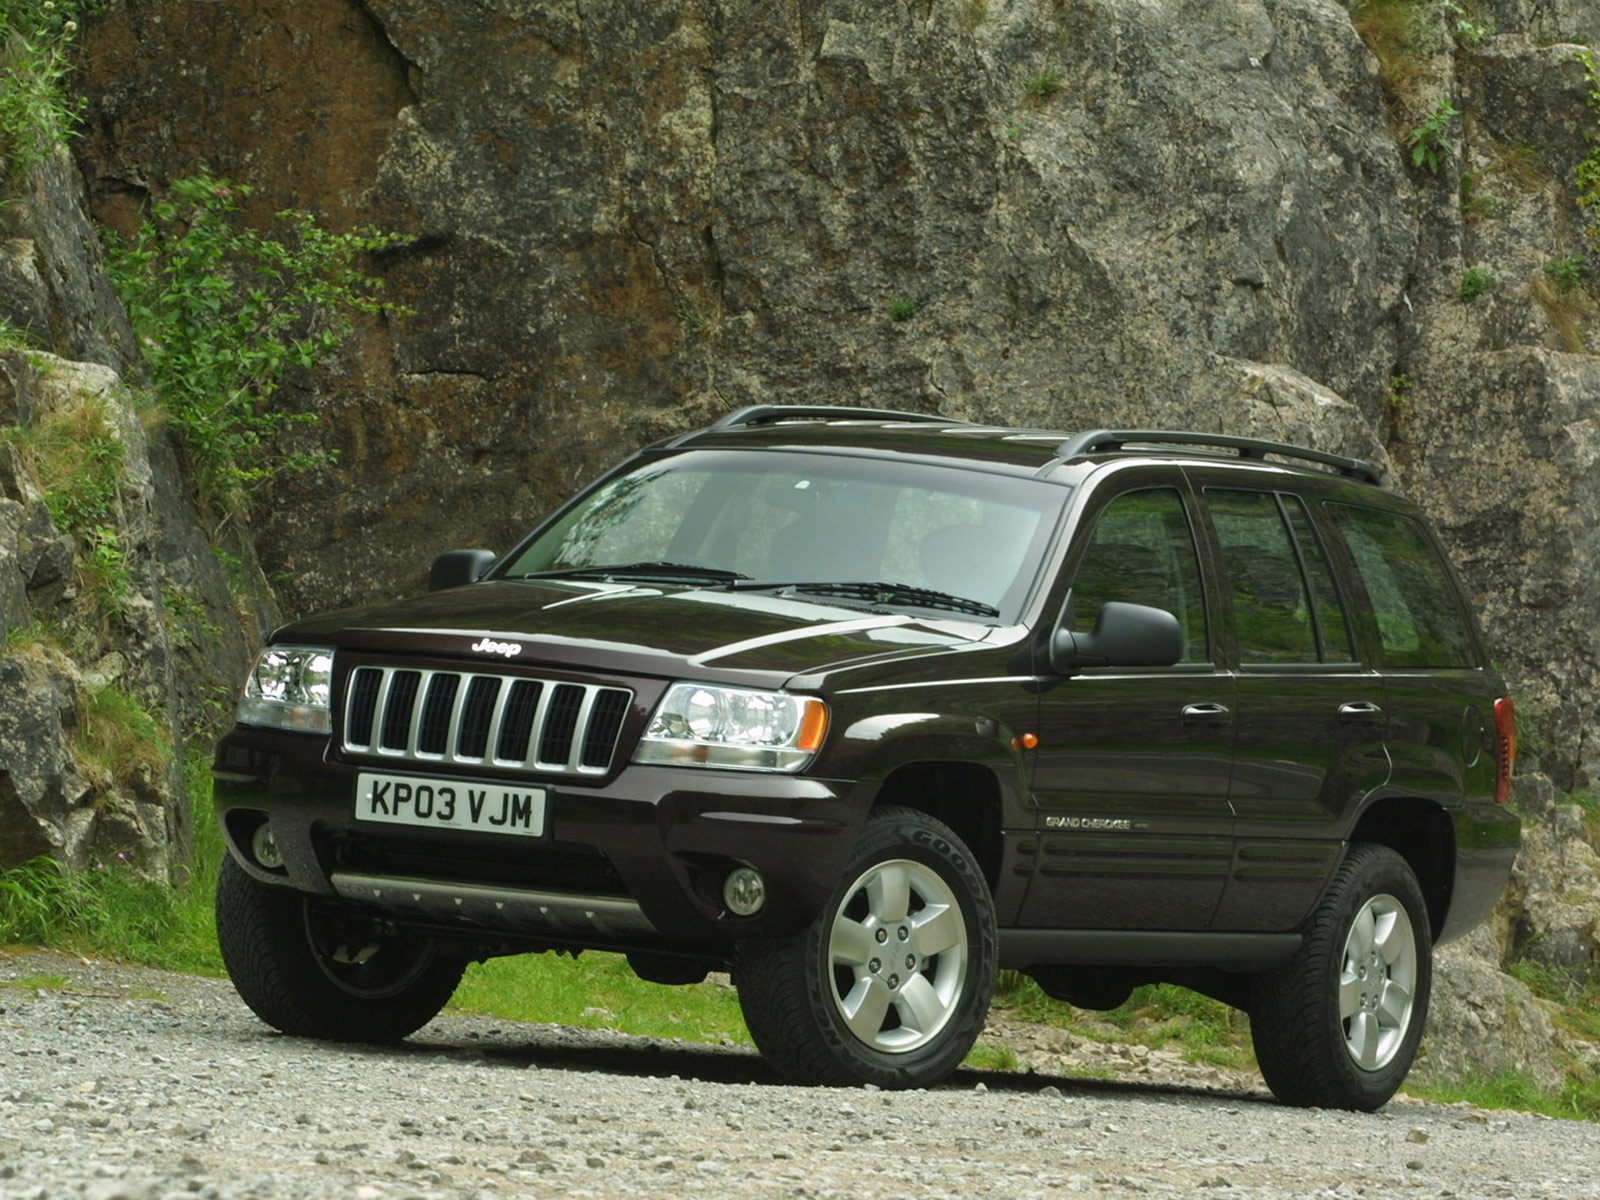 2003 JEEP Grand Cherokee UK Version pictures, review